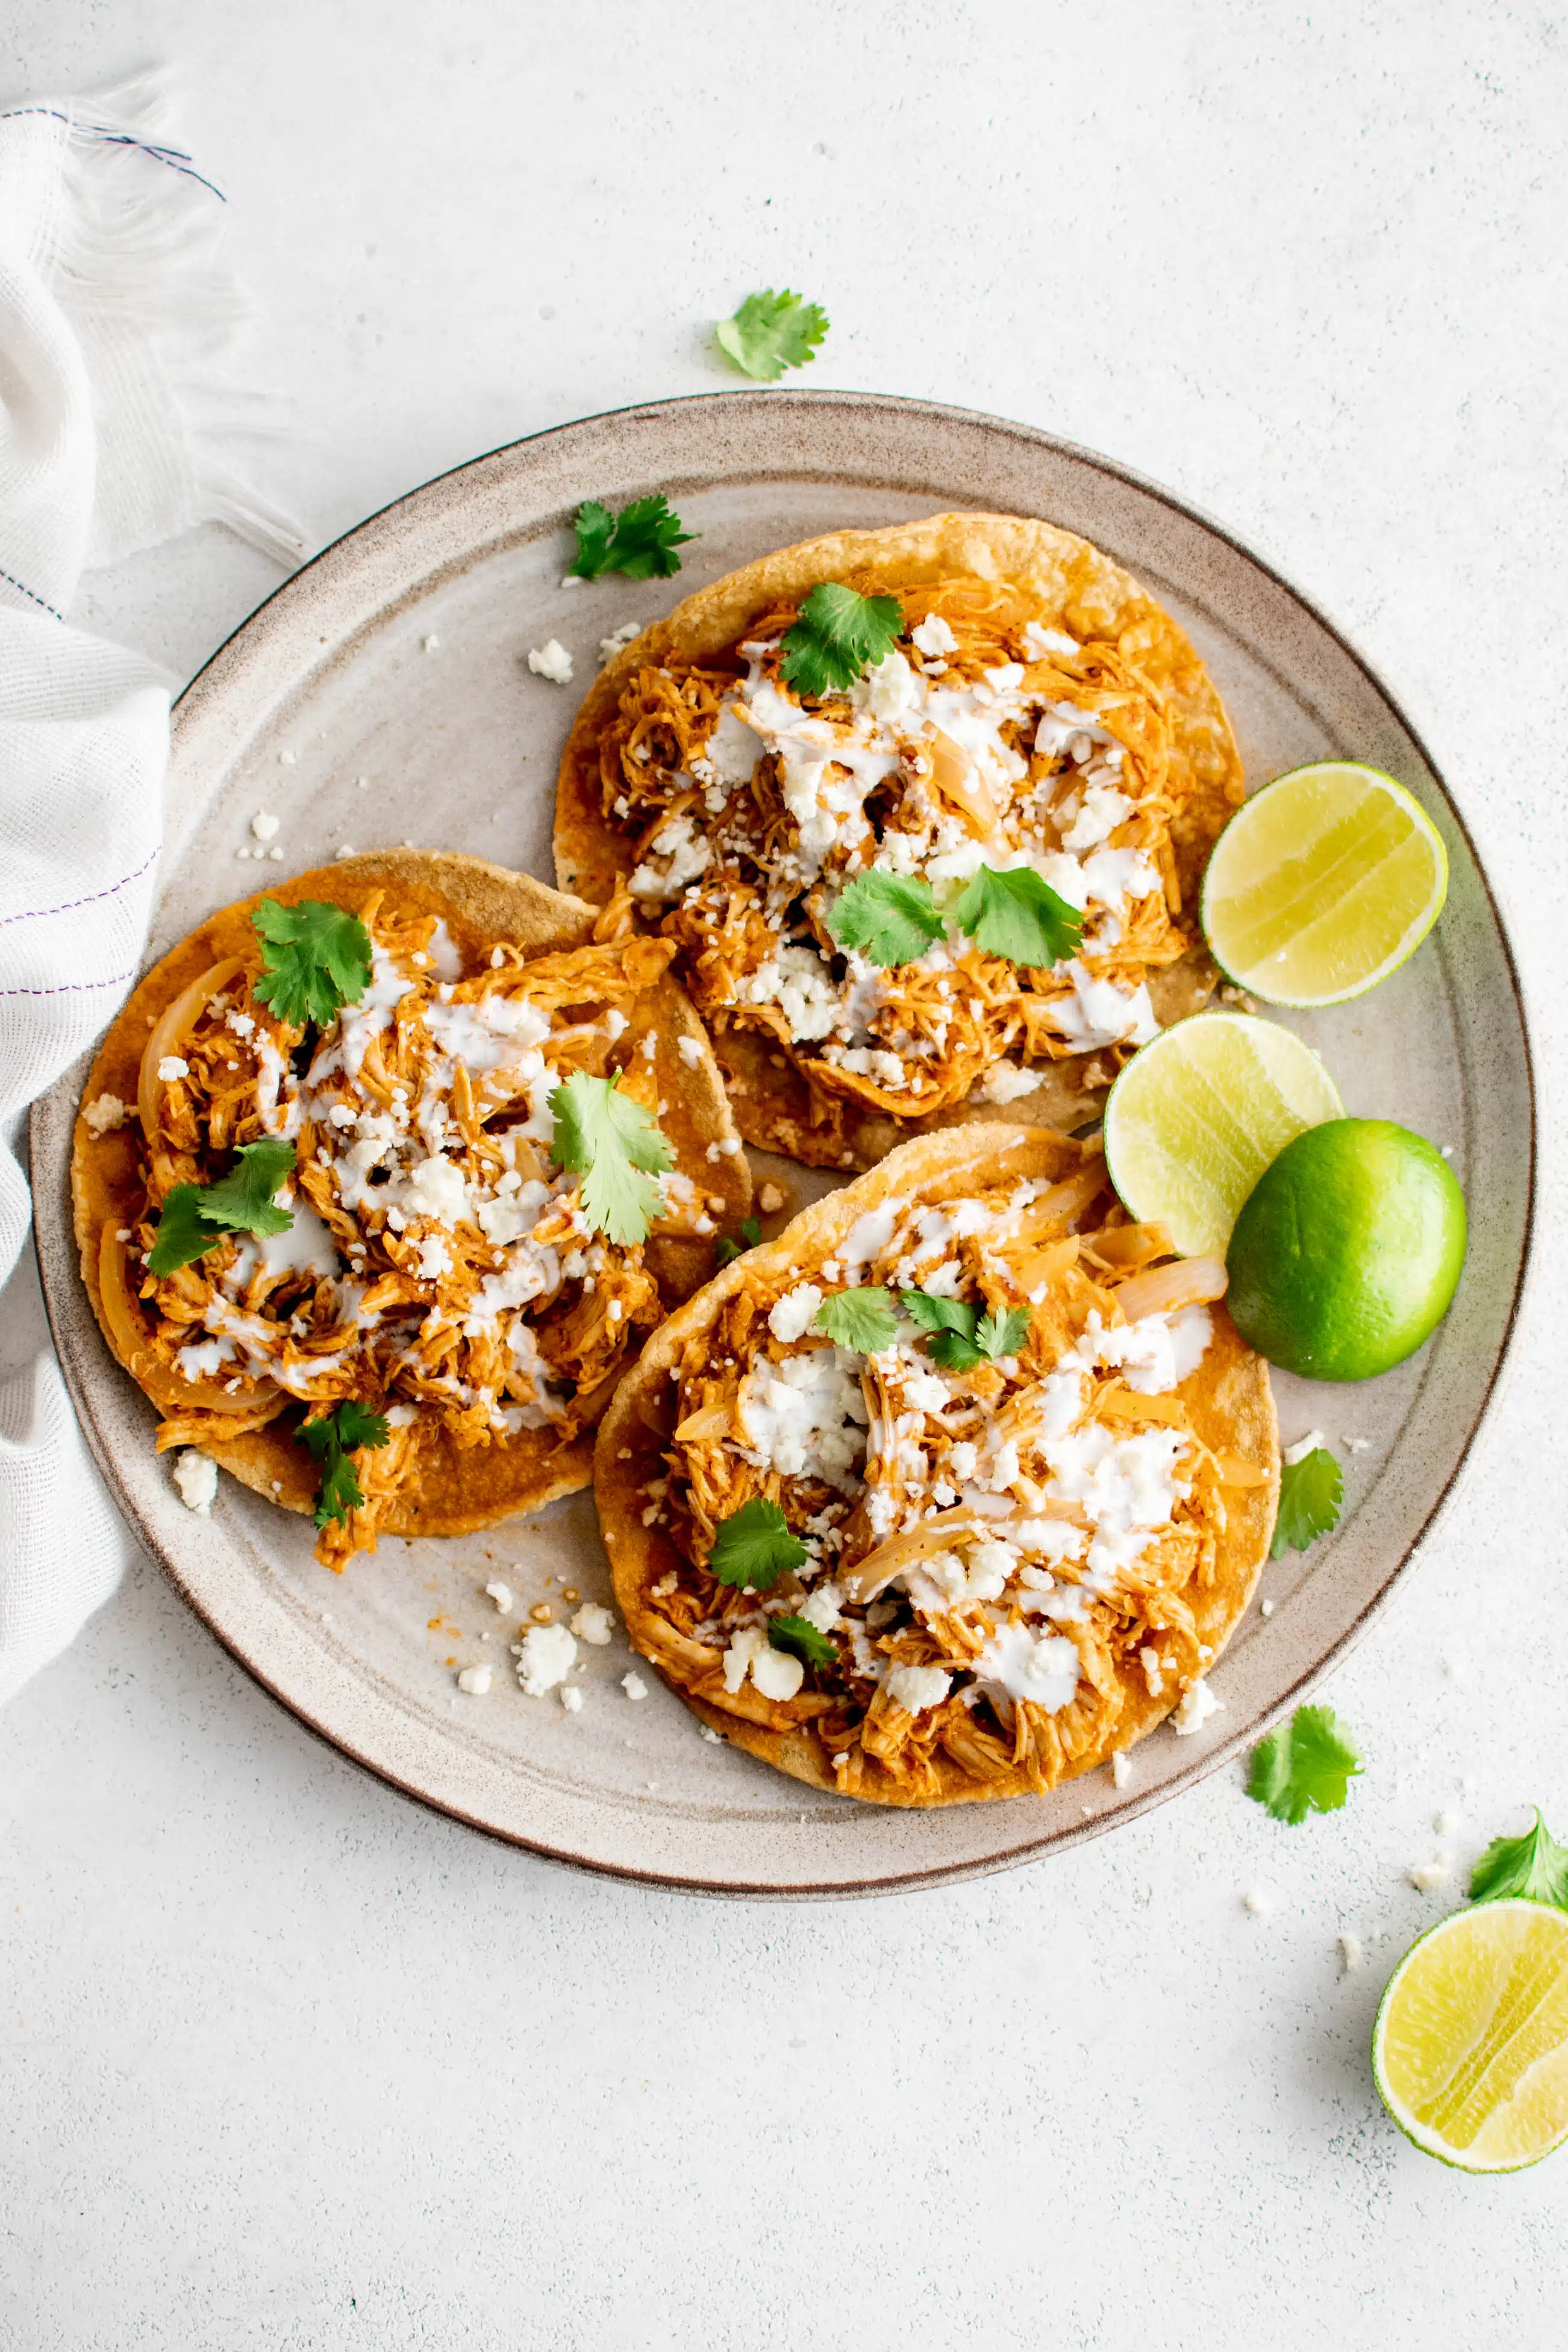 Three chicken tinga tostadas on a round serving plate garnished with crumbled cotija cheese, crema, cilantro, and a side of fresh limes.